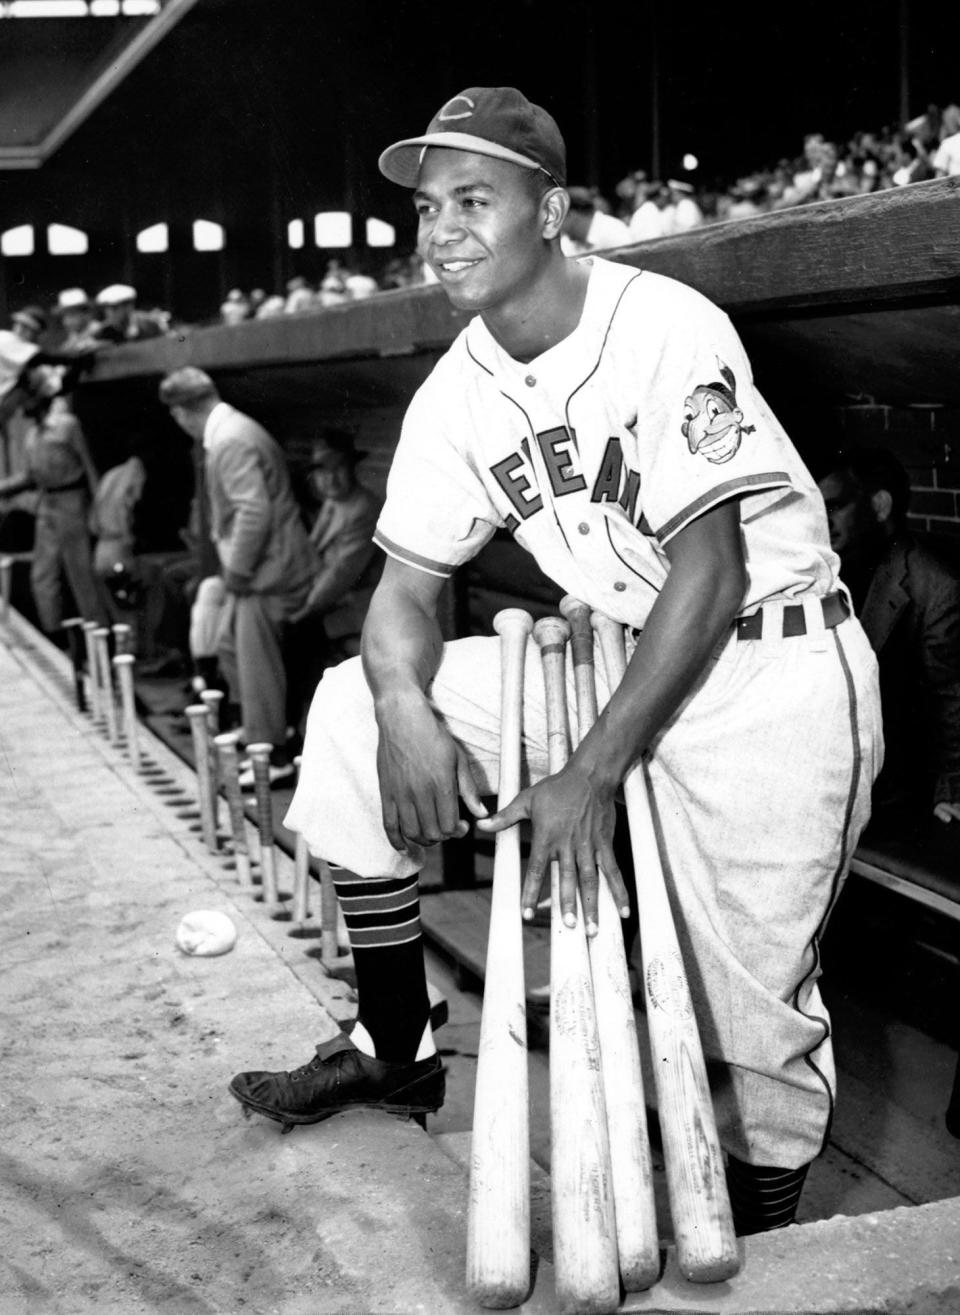 Larry Doby, the first Black player in the American League, poses proudly in his Cleveland Indians uniform in the dugout in Comiskey Park in Chicago, Ill., on July 5, 1947.